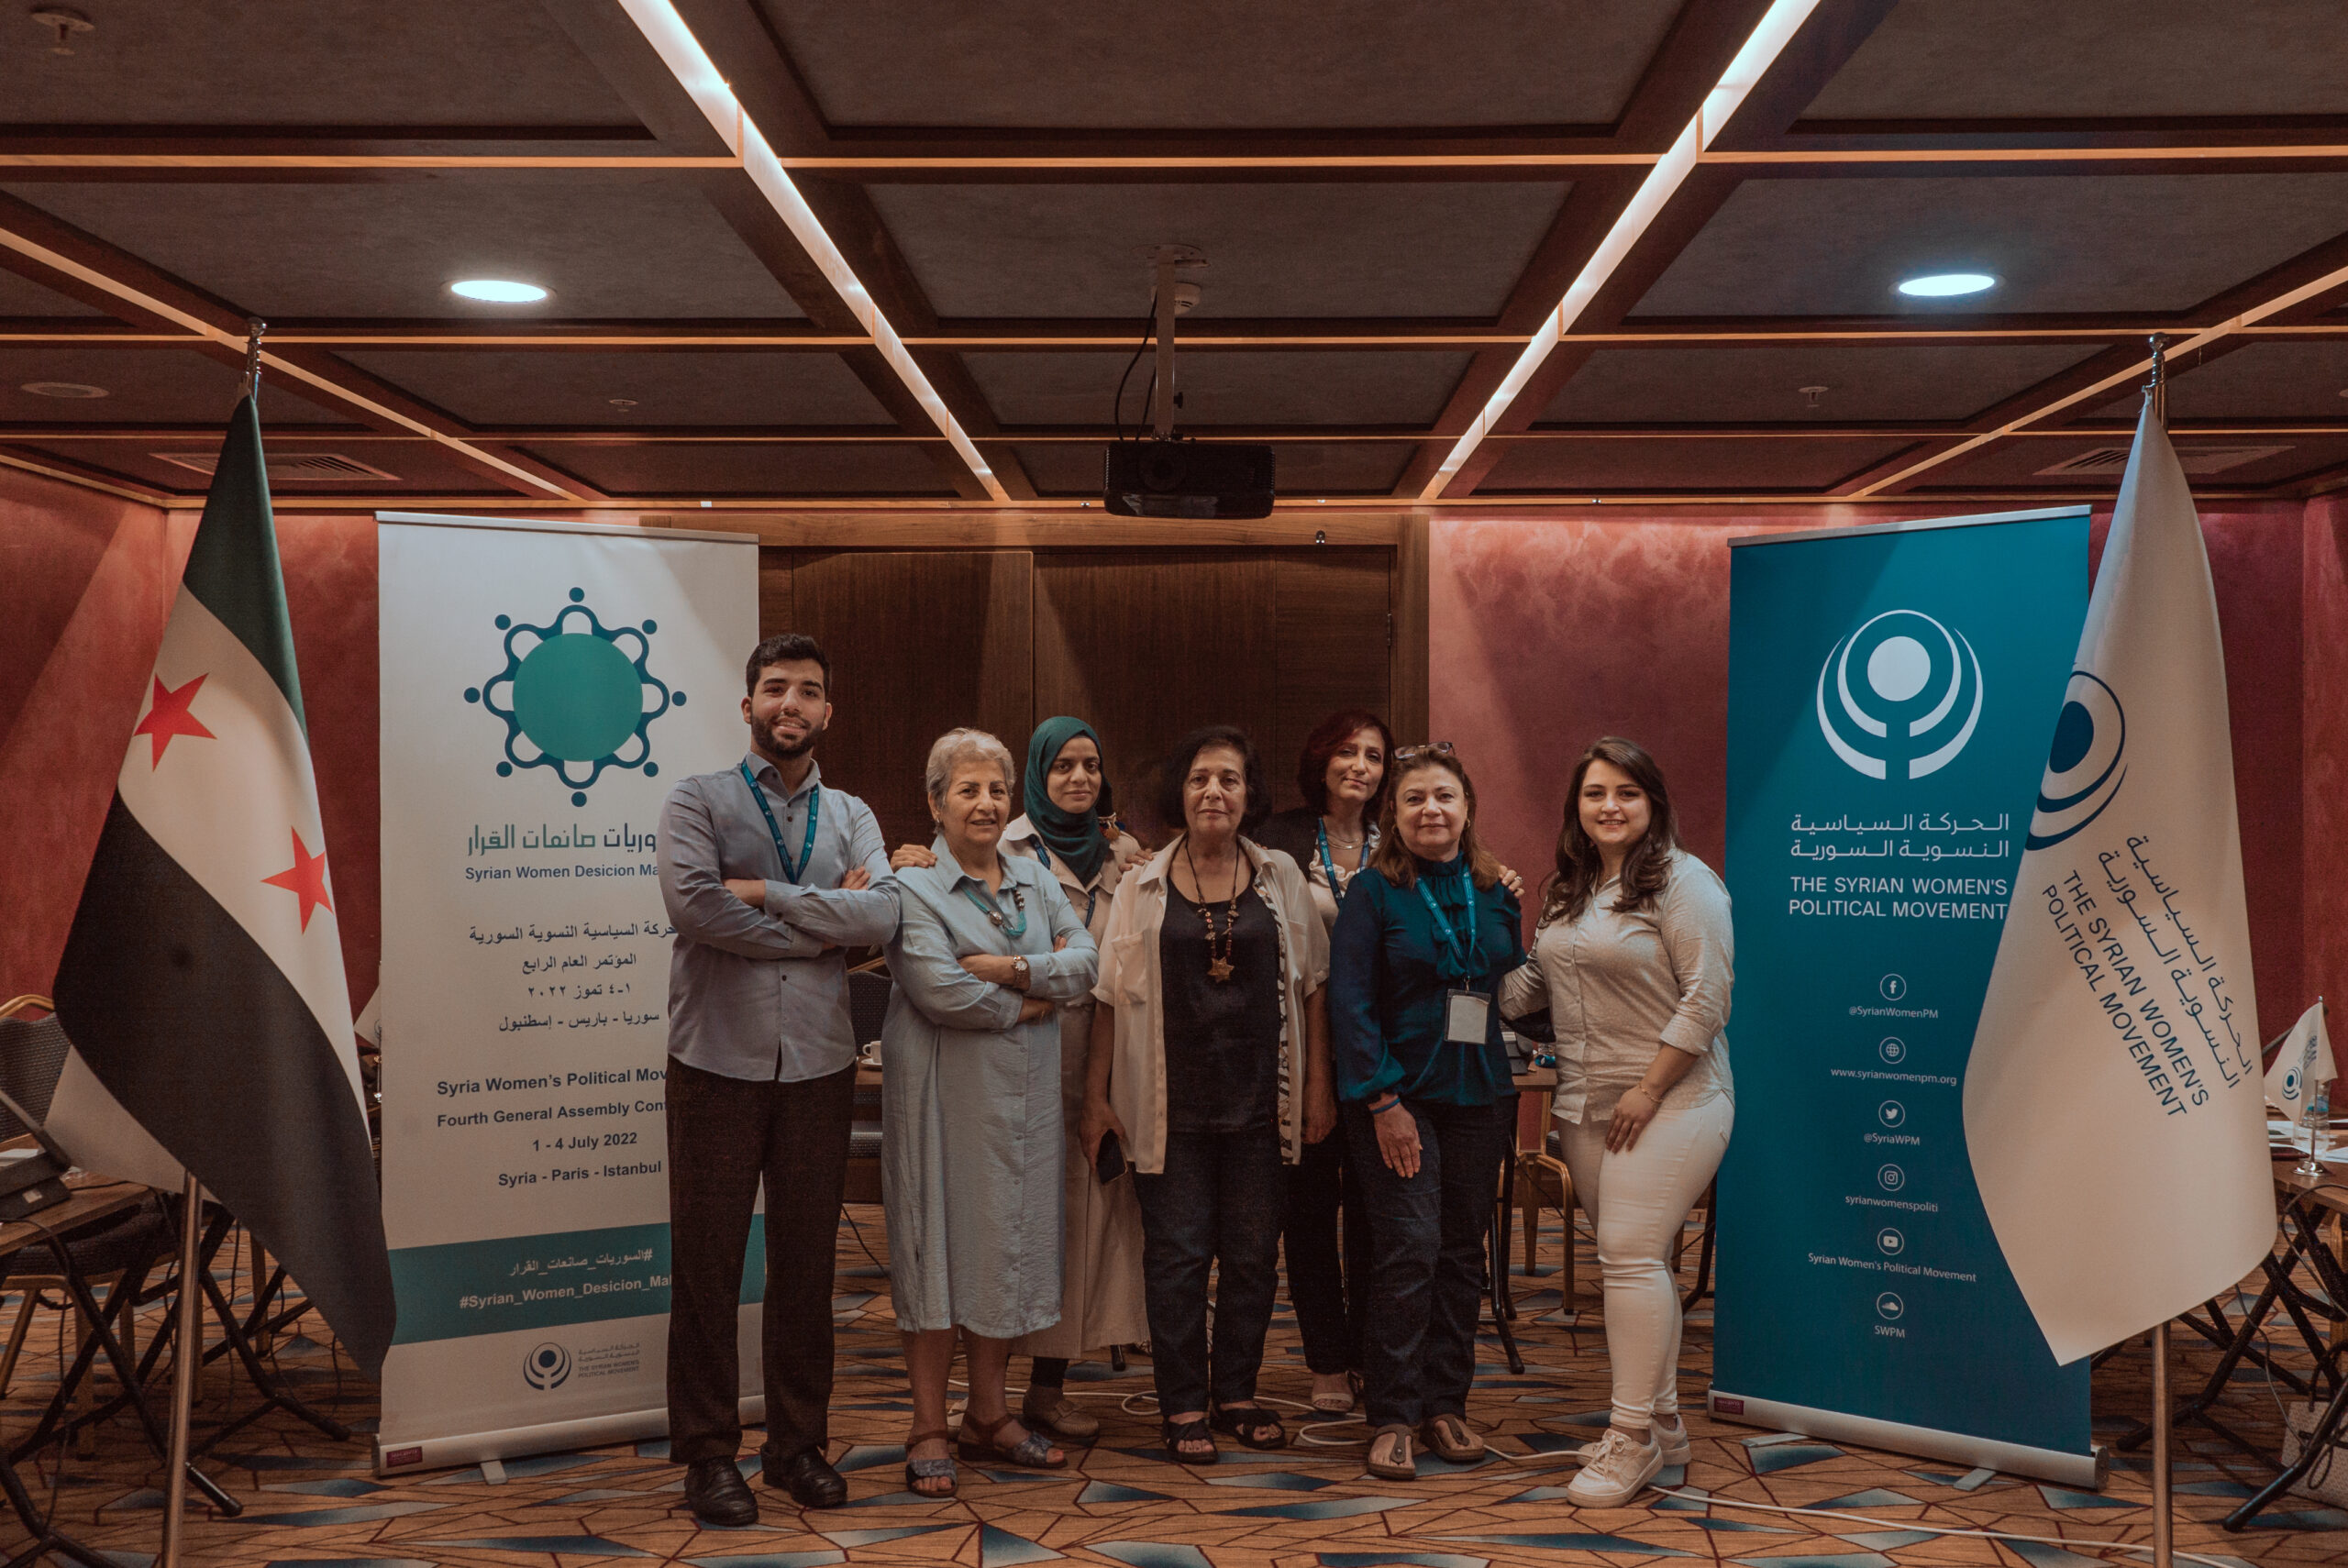 The Fourth General Conference of the Syrian Women’s Political Movement (1-4 July 2022) – Turkey